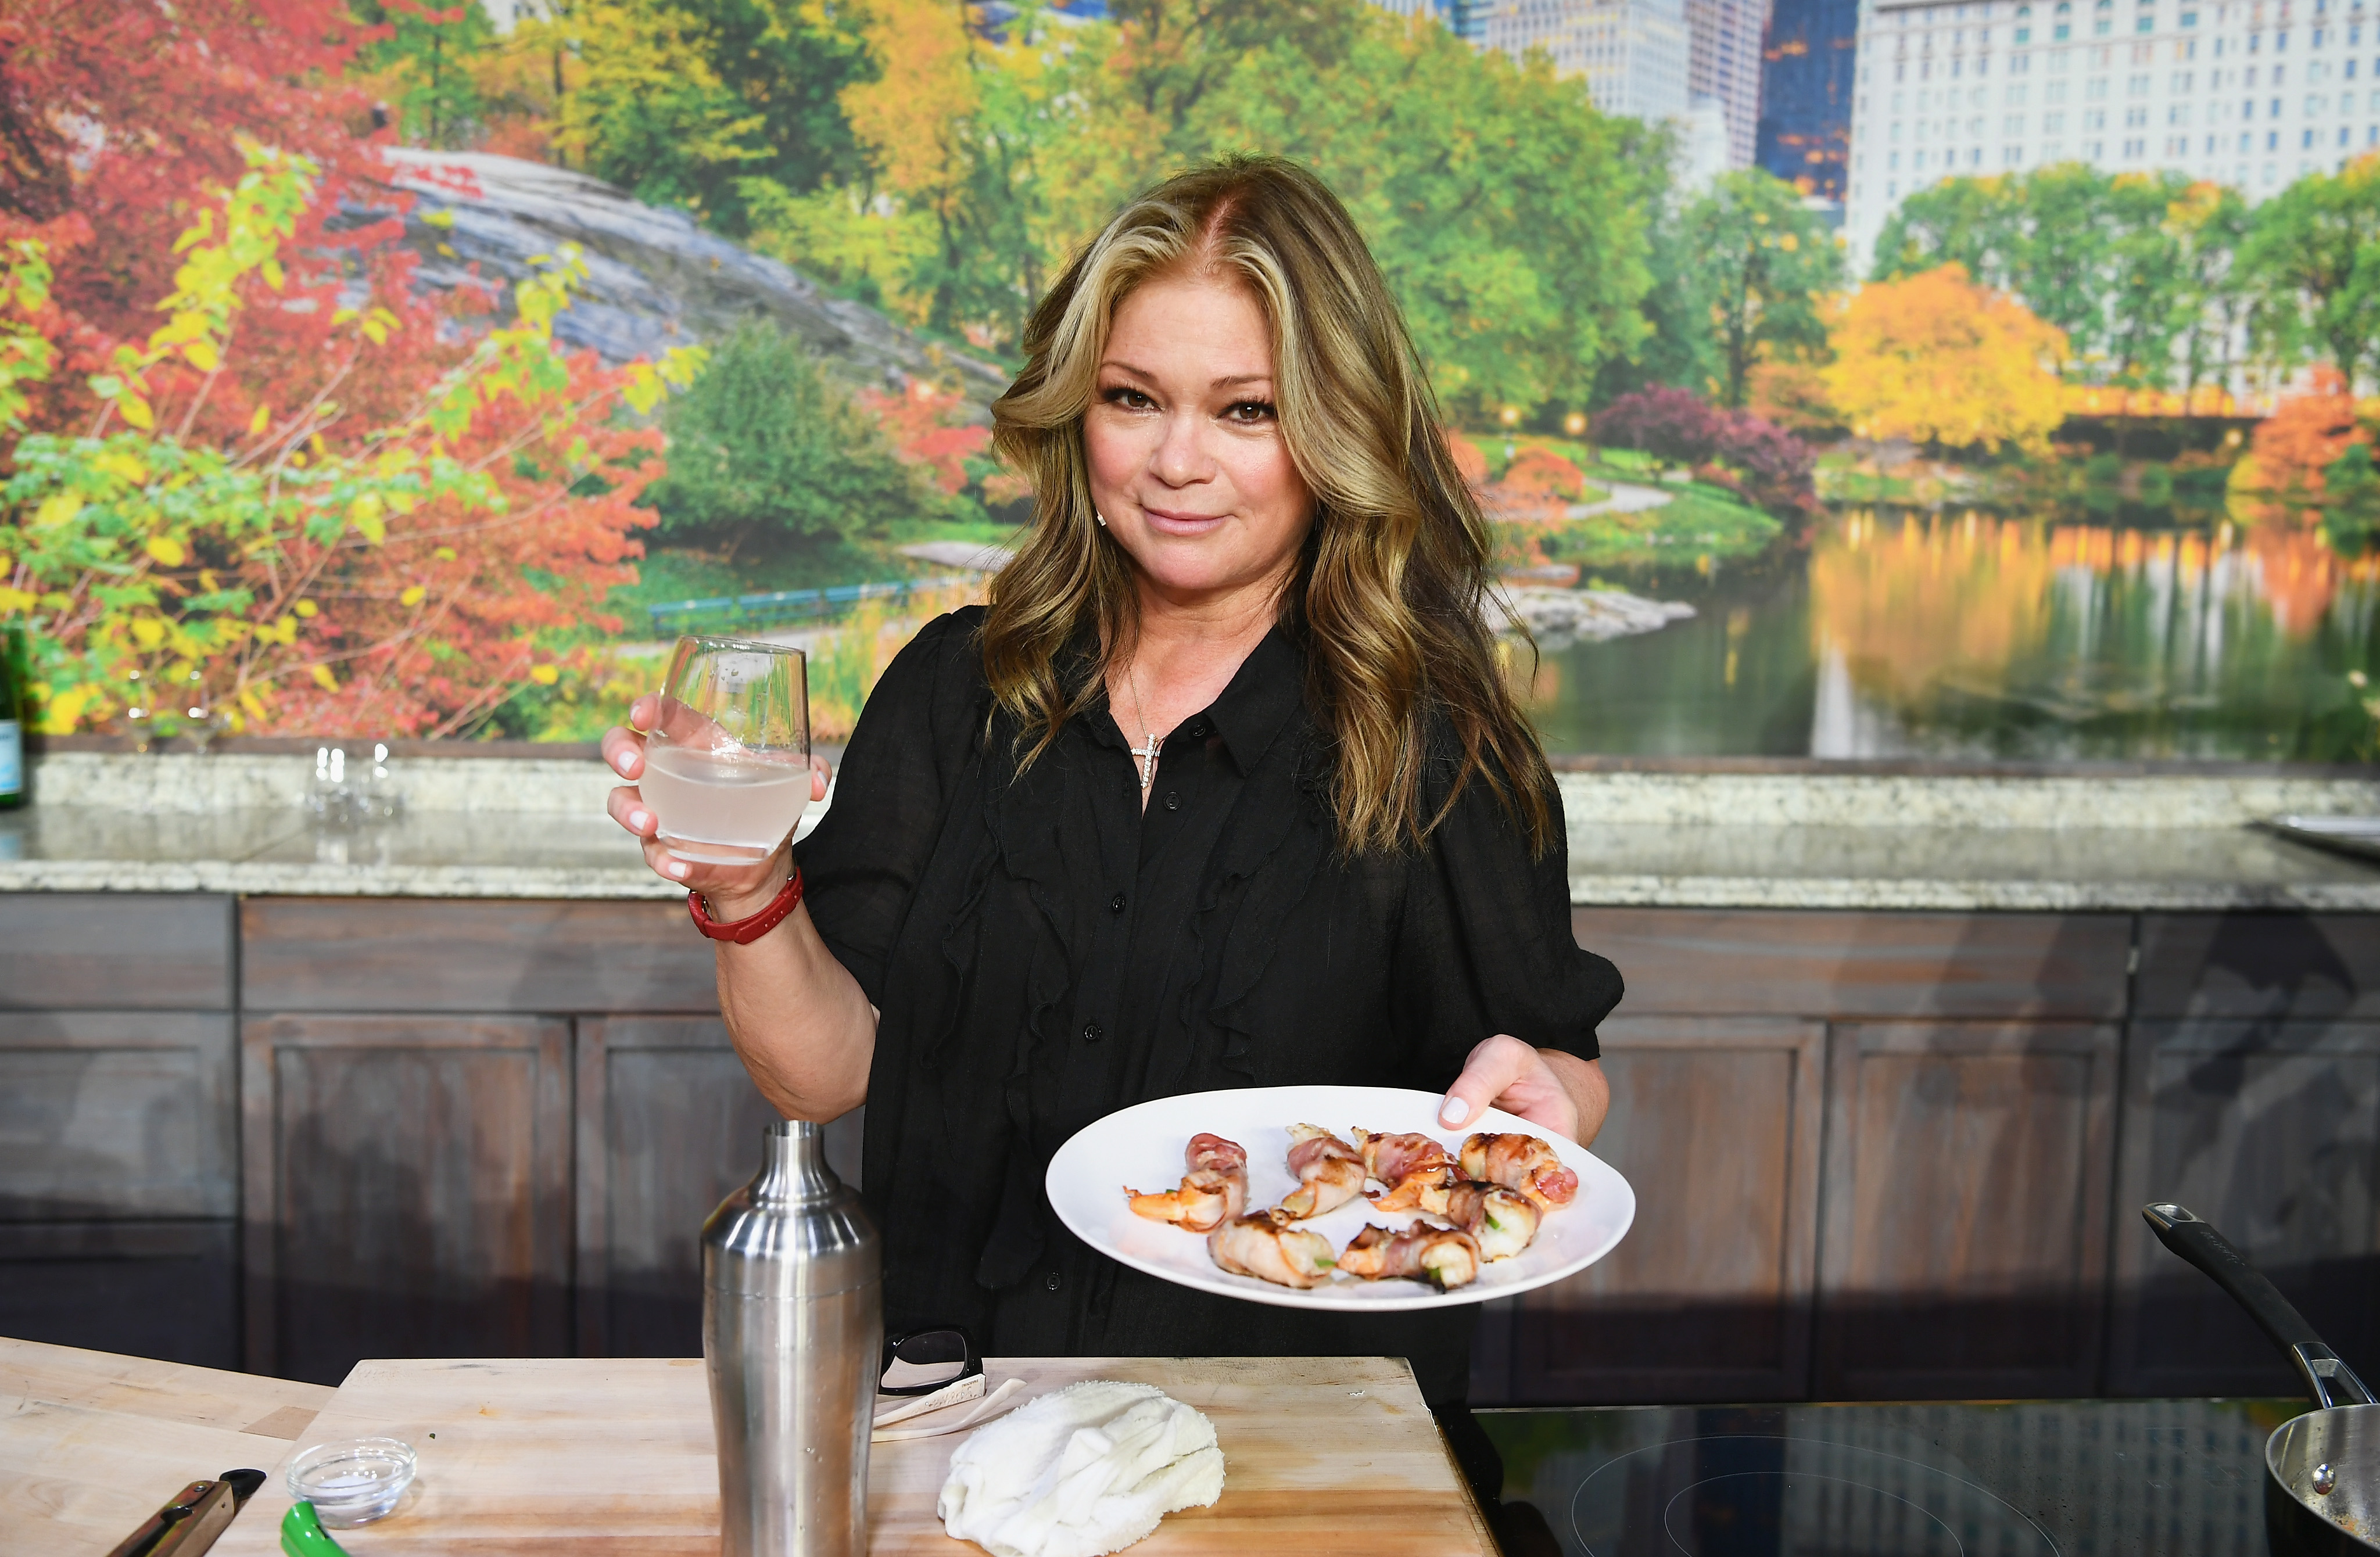 Valerie Bertinelli poses with a plate of food and a drink at a 2018 Food Network event.